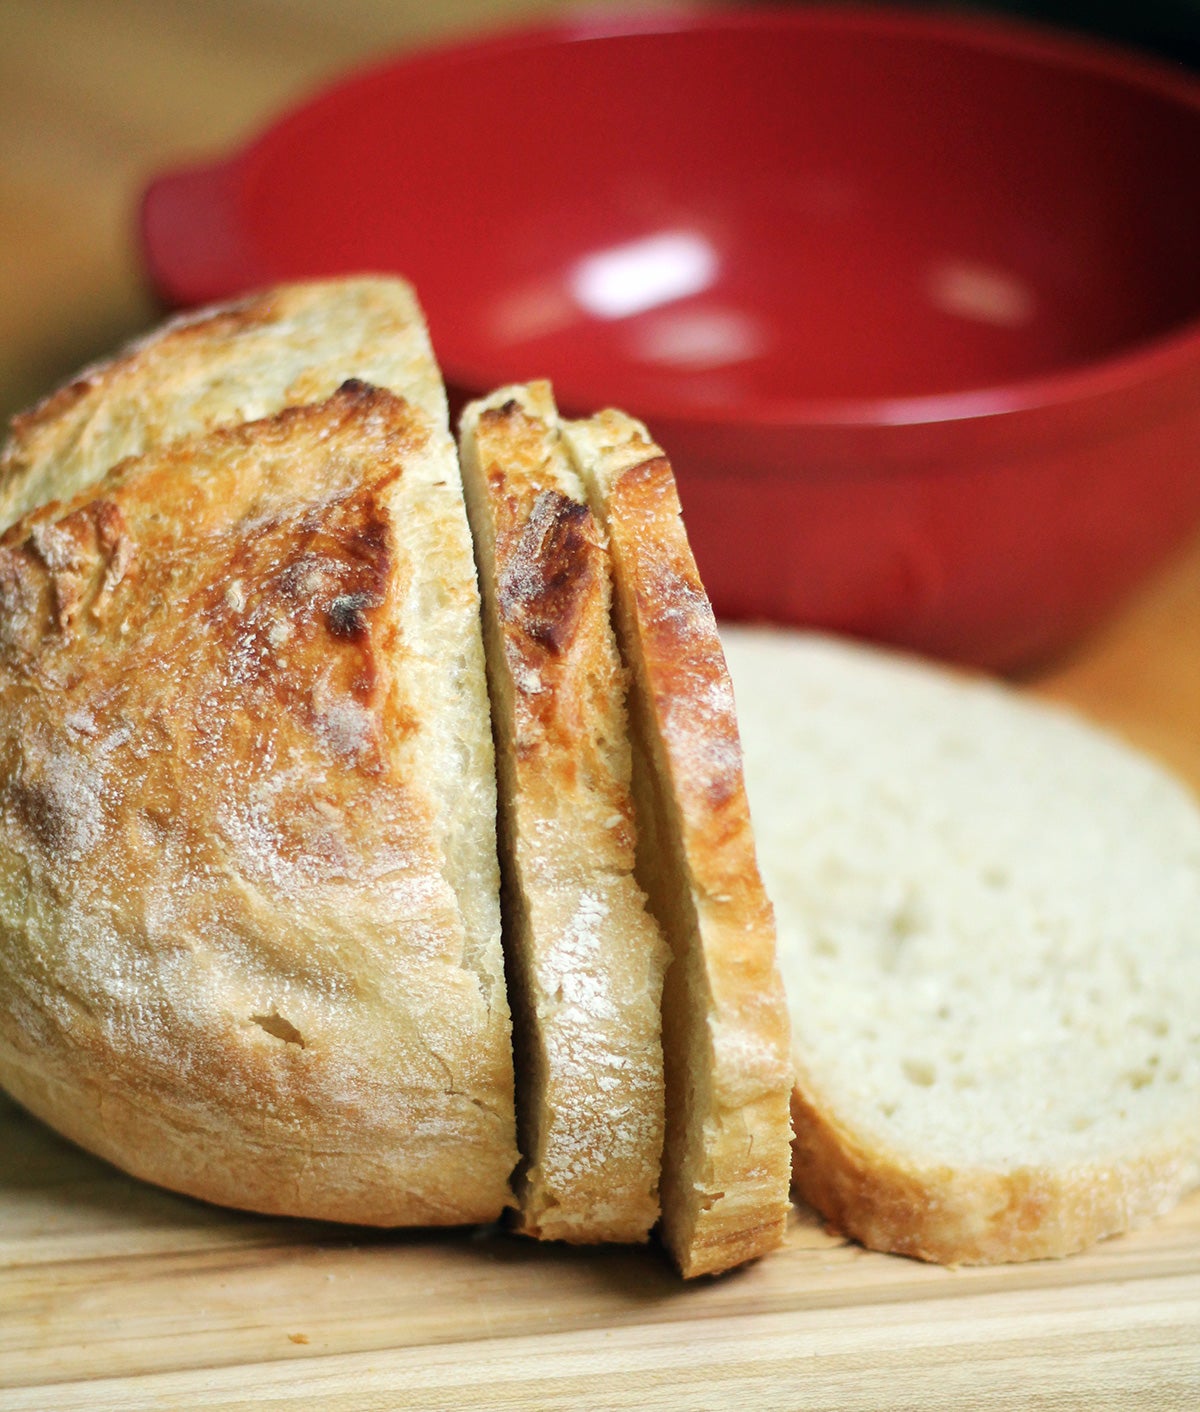 Homemade Dutch Oven Bread: Kneaded and No-Knead Methods - Kitchen Joy